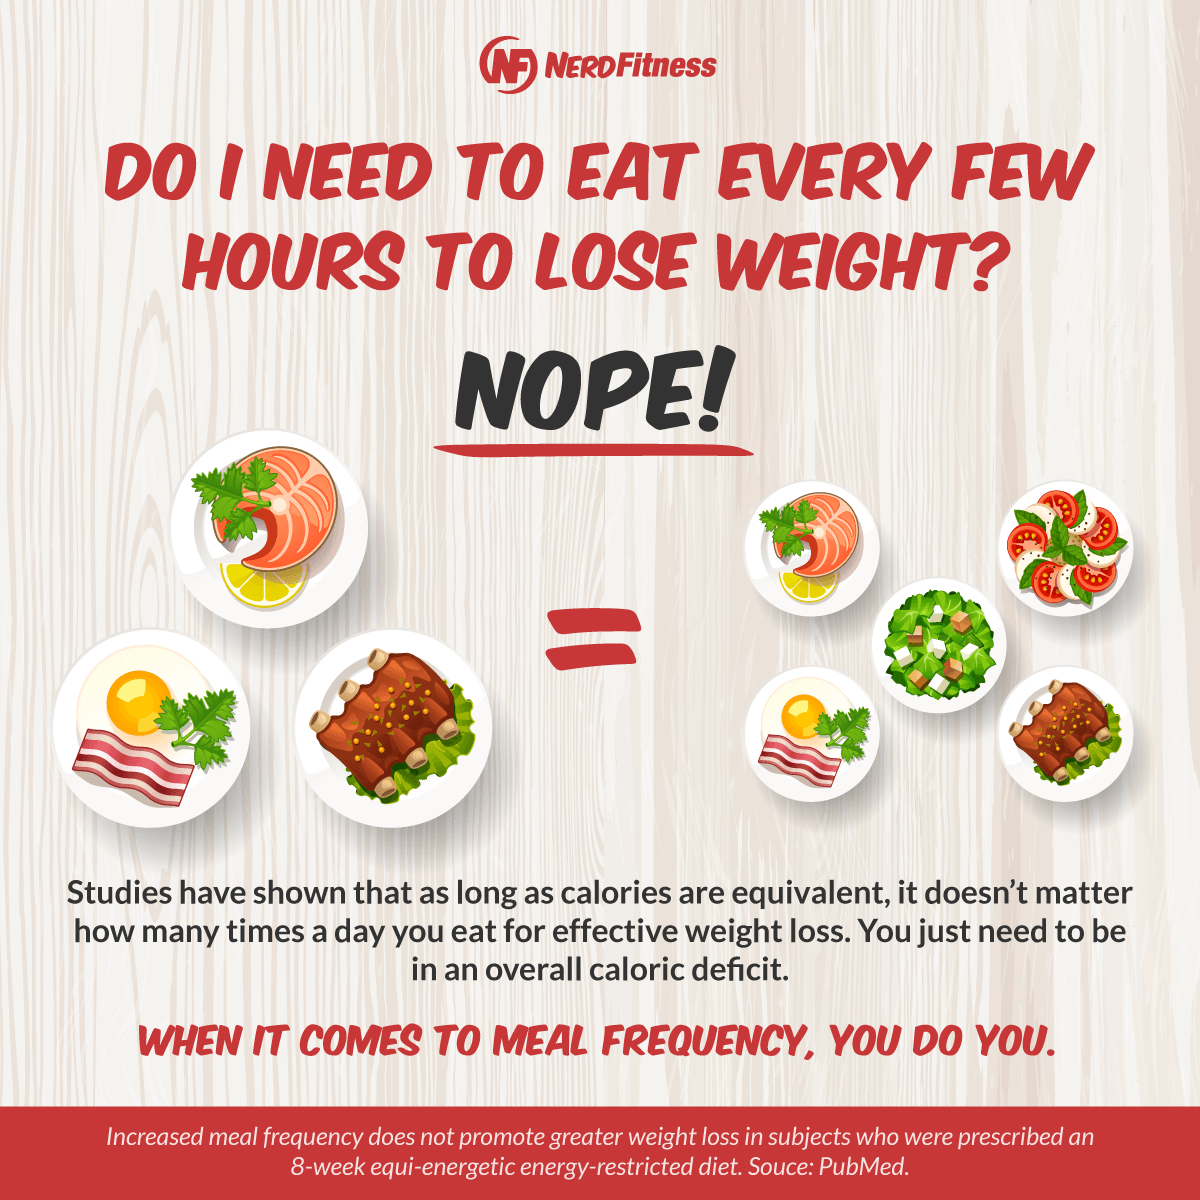 This infographic discusses how snacking isn't necessary for weight loss.